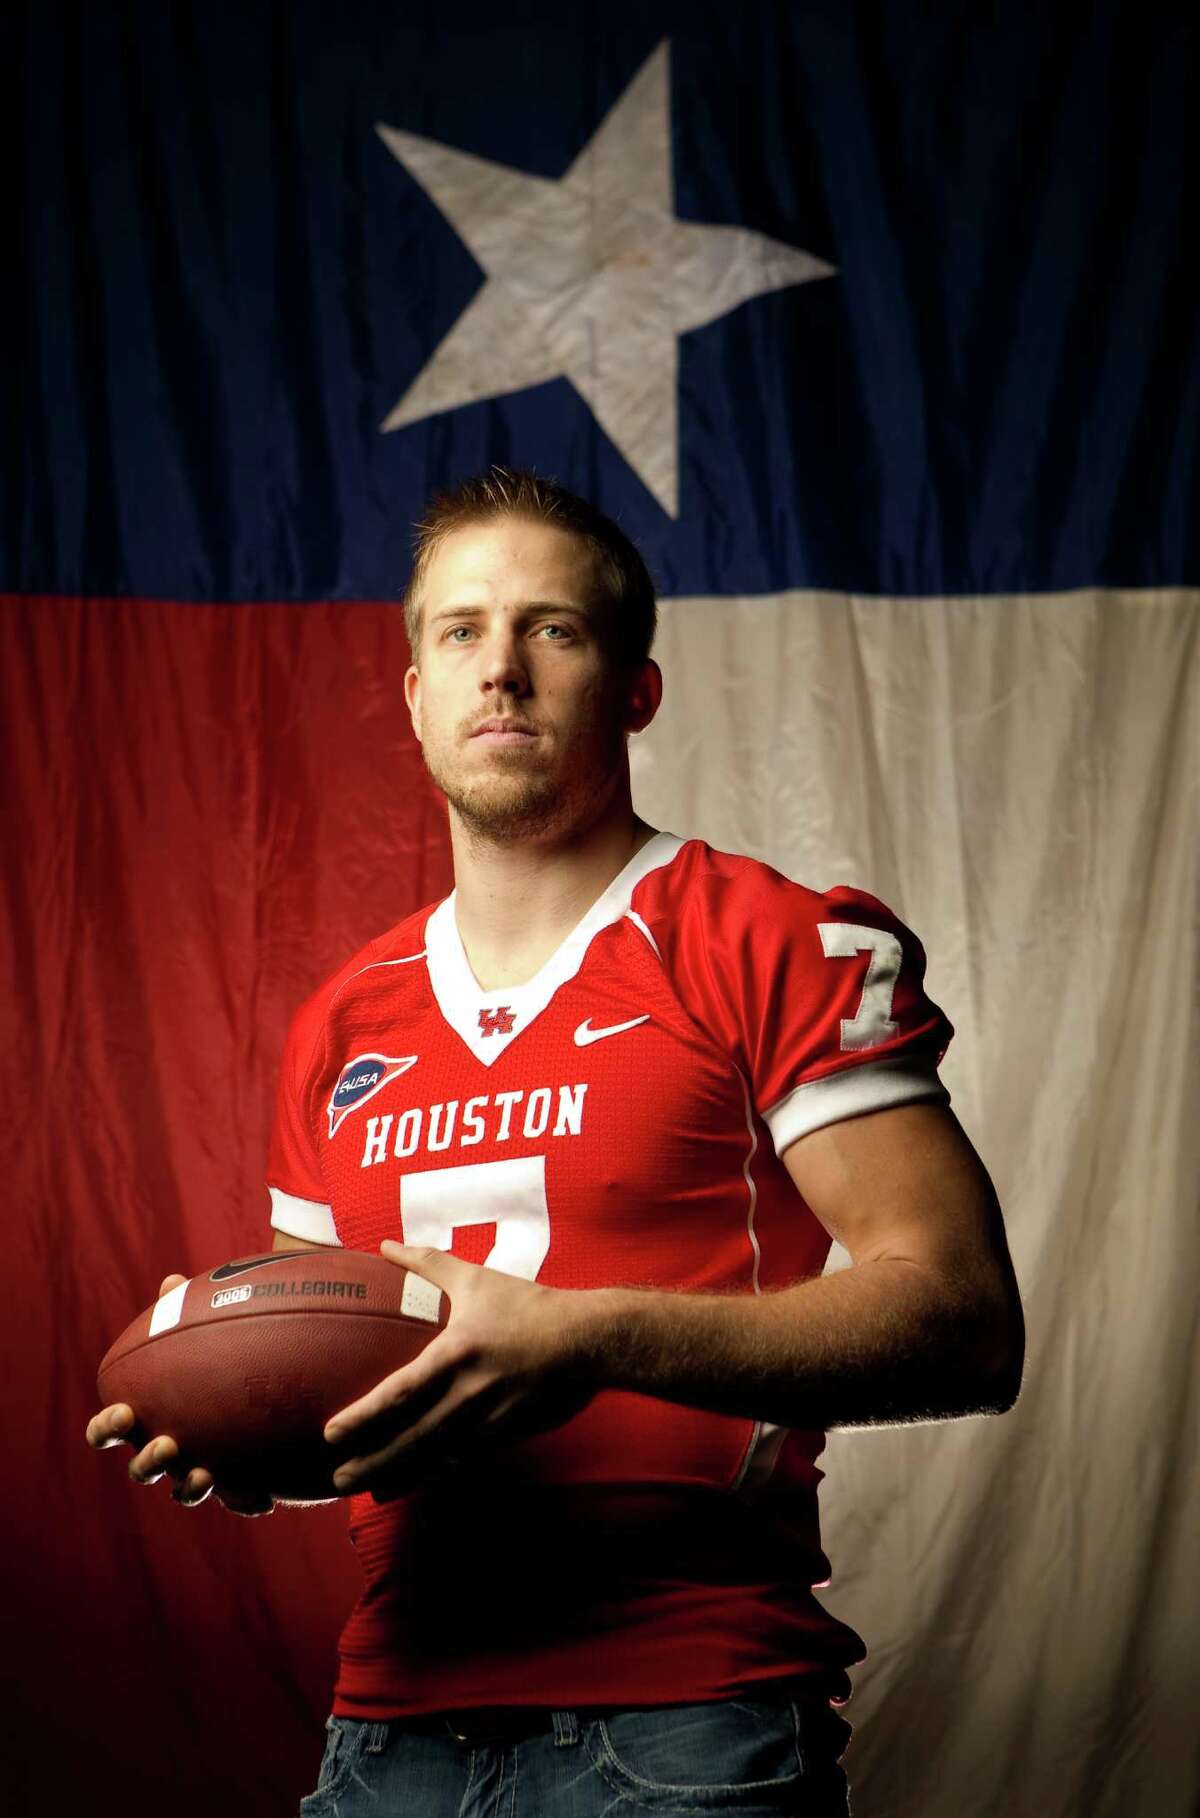 University of Houston quarterback Case Keenum. Photographed , Tuesday, Nov. 22, 2011, in Houston. ( Nick de la Torre / Houston Chronicle )***Check with Gonzales or Karnicki before use****